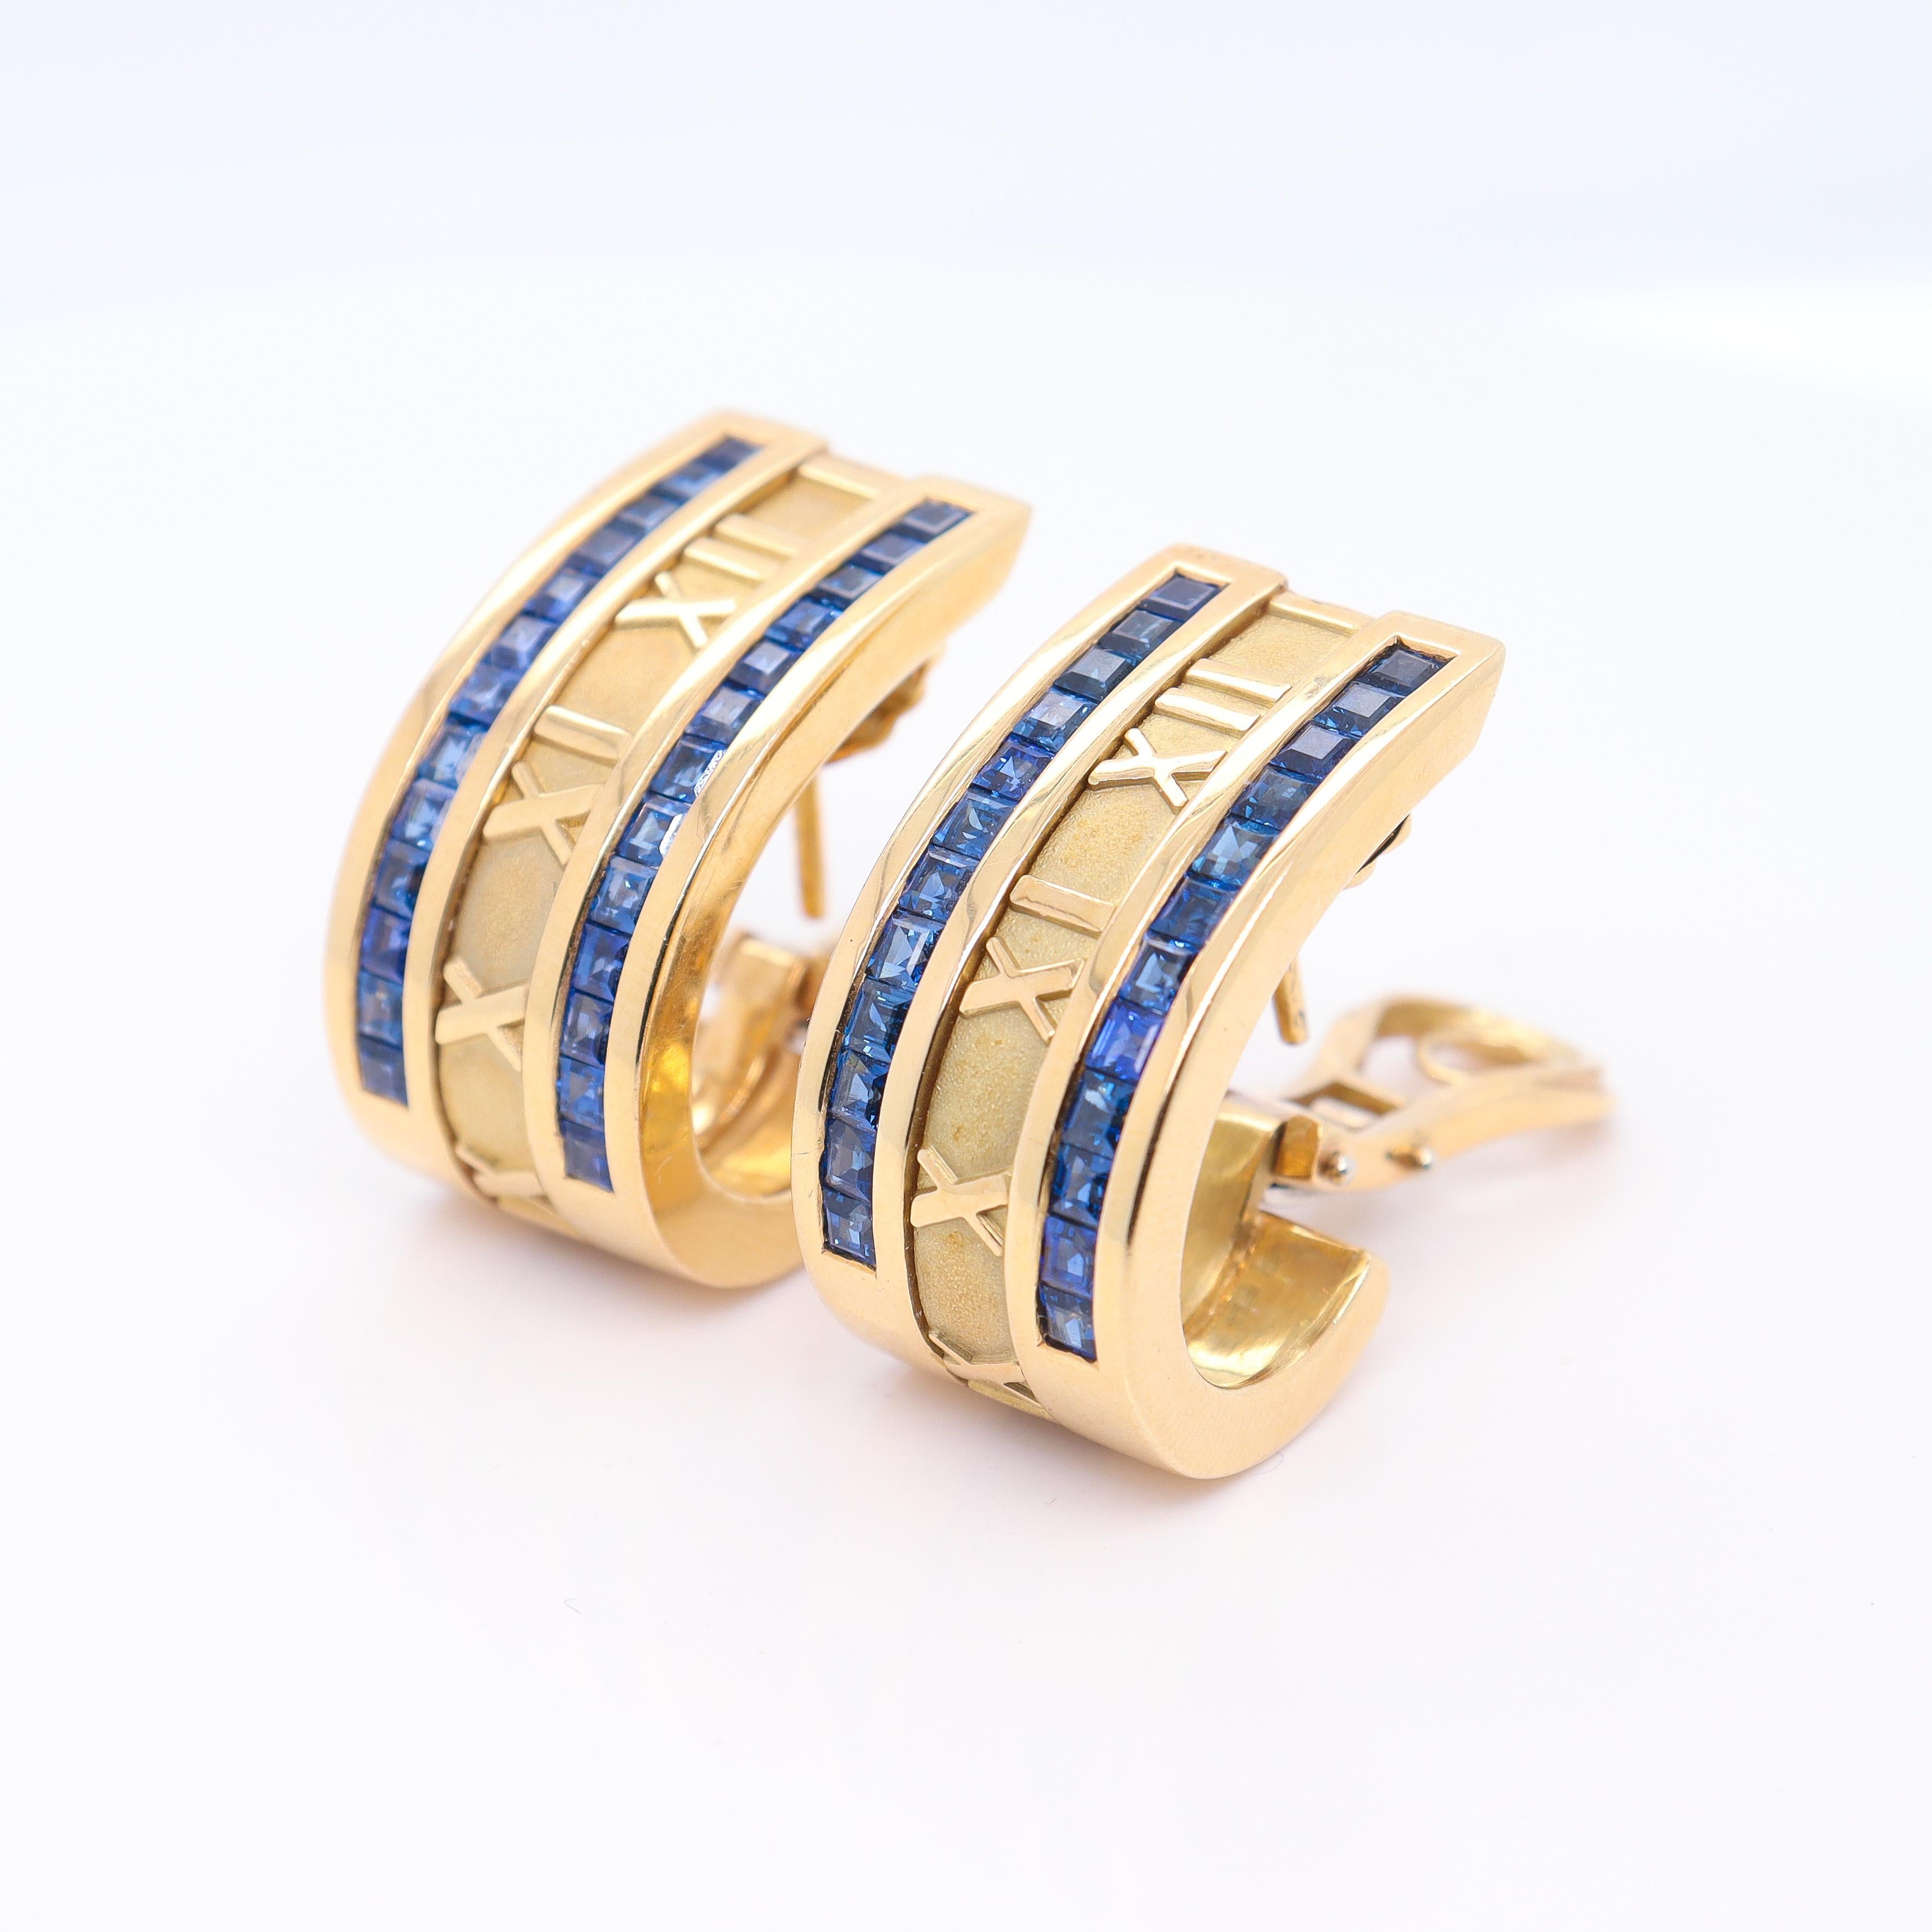 A fine pair of retro Tiffany & Co. gold & sapphire clip earrings.

In 18K gold.

In the Atlas pattern.

Each channel set with 24 square cut sapphires and omega clip backs for extra security.

The 'Atlas' collection was designed by John Loring in the